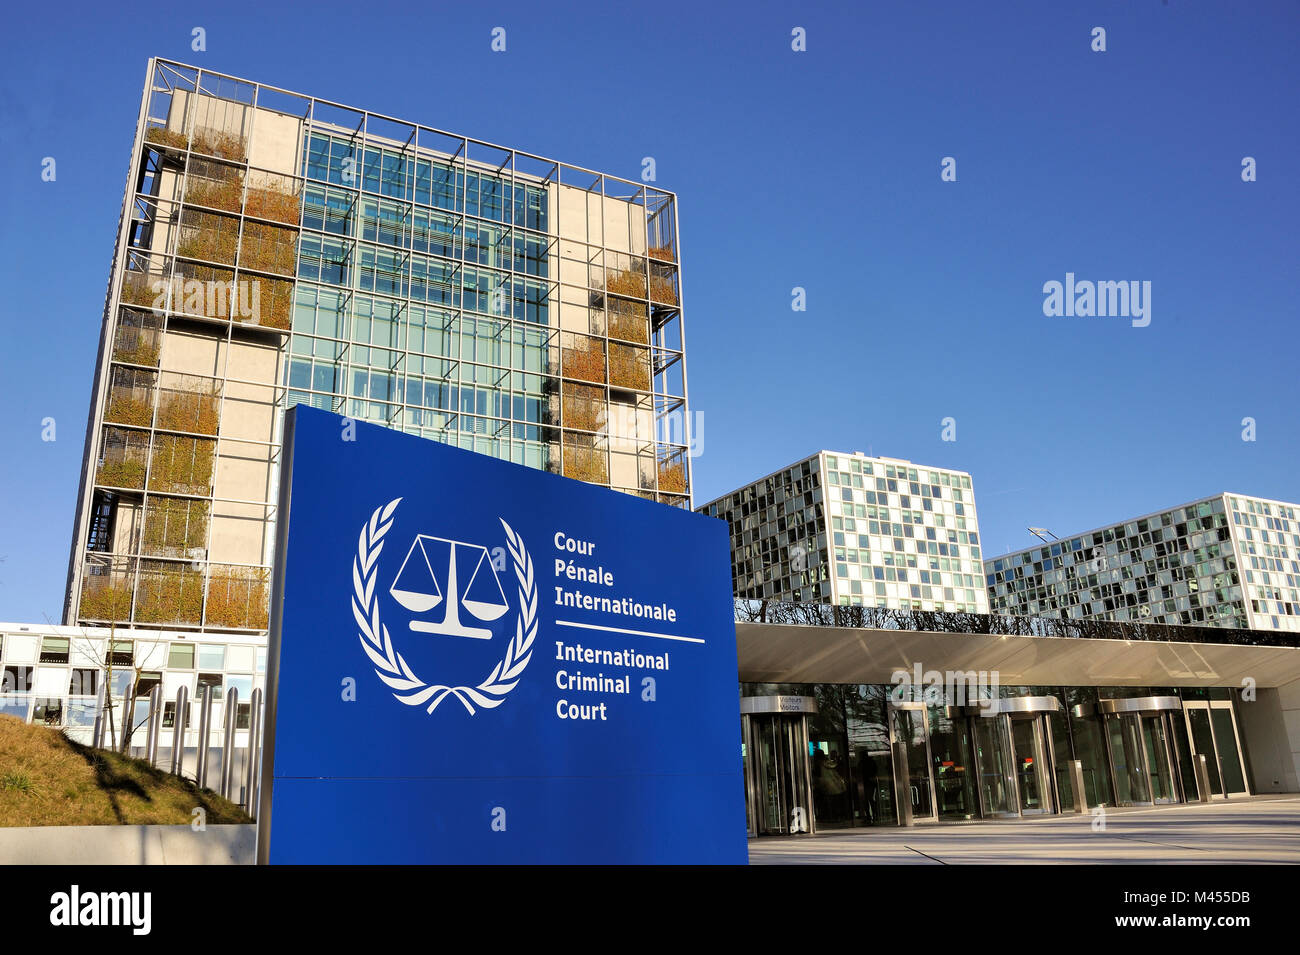 The Hague, Netherlands - 14 February 2018: The International Criminal Court entrance sign at the ICC building. Stock Photo